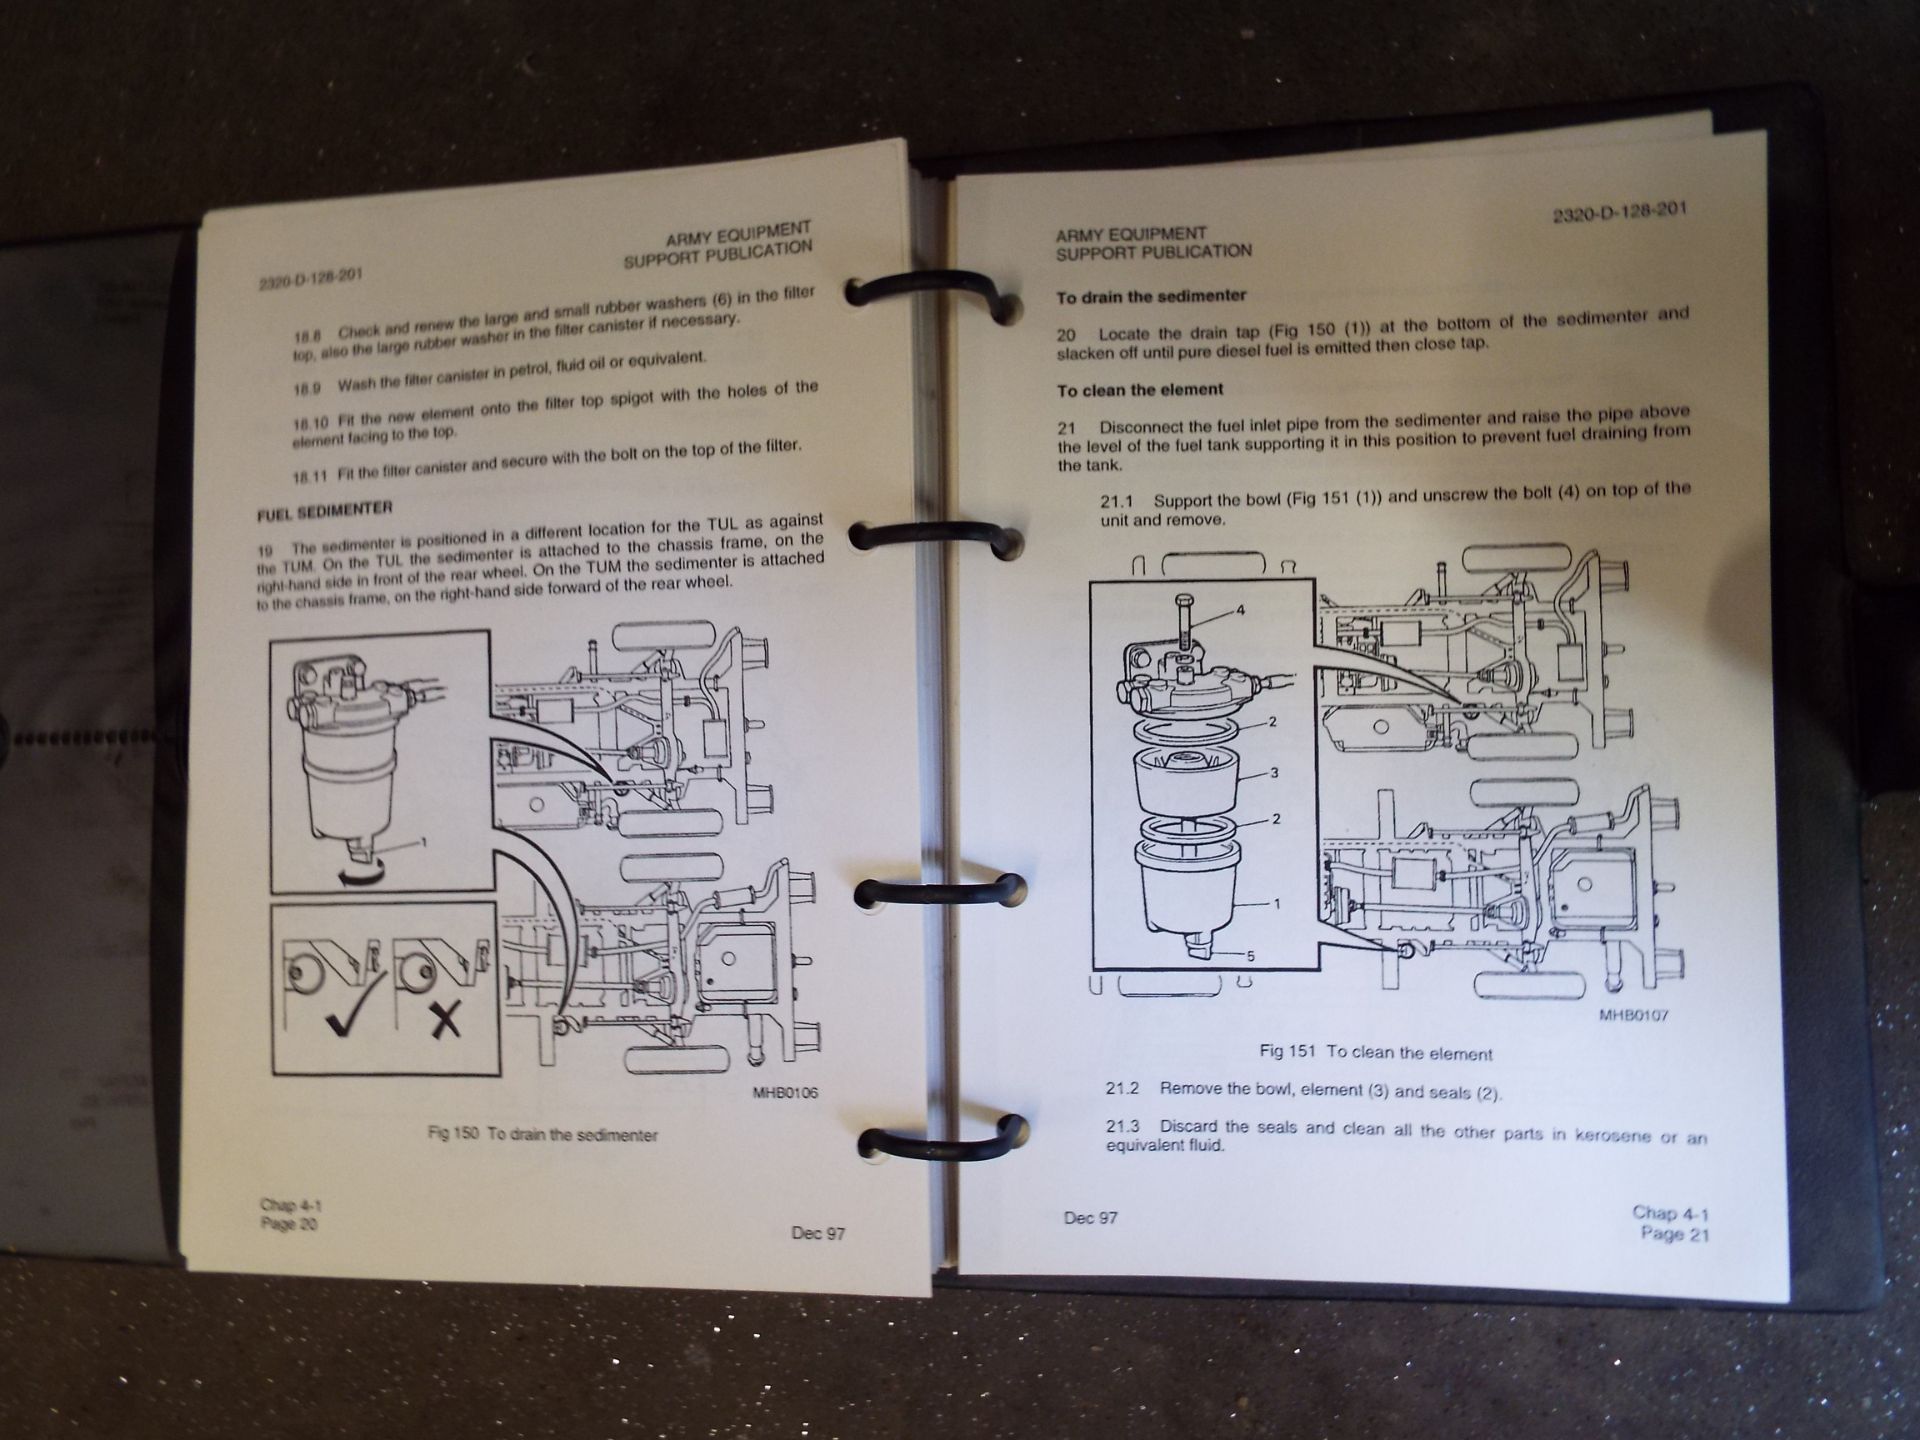 Extremely Rare Military Land Rover WOLF Operating Manual - Image 9 of 10